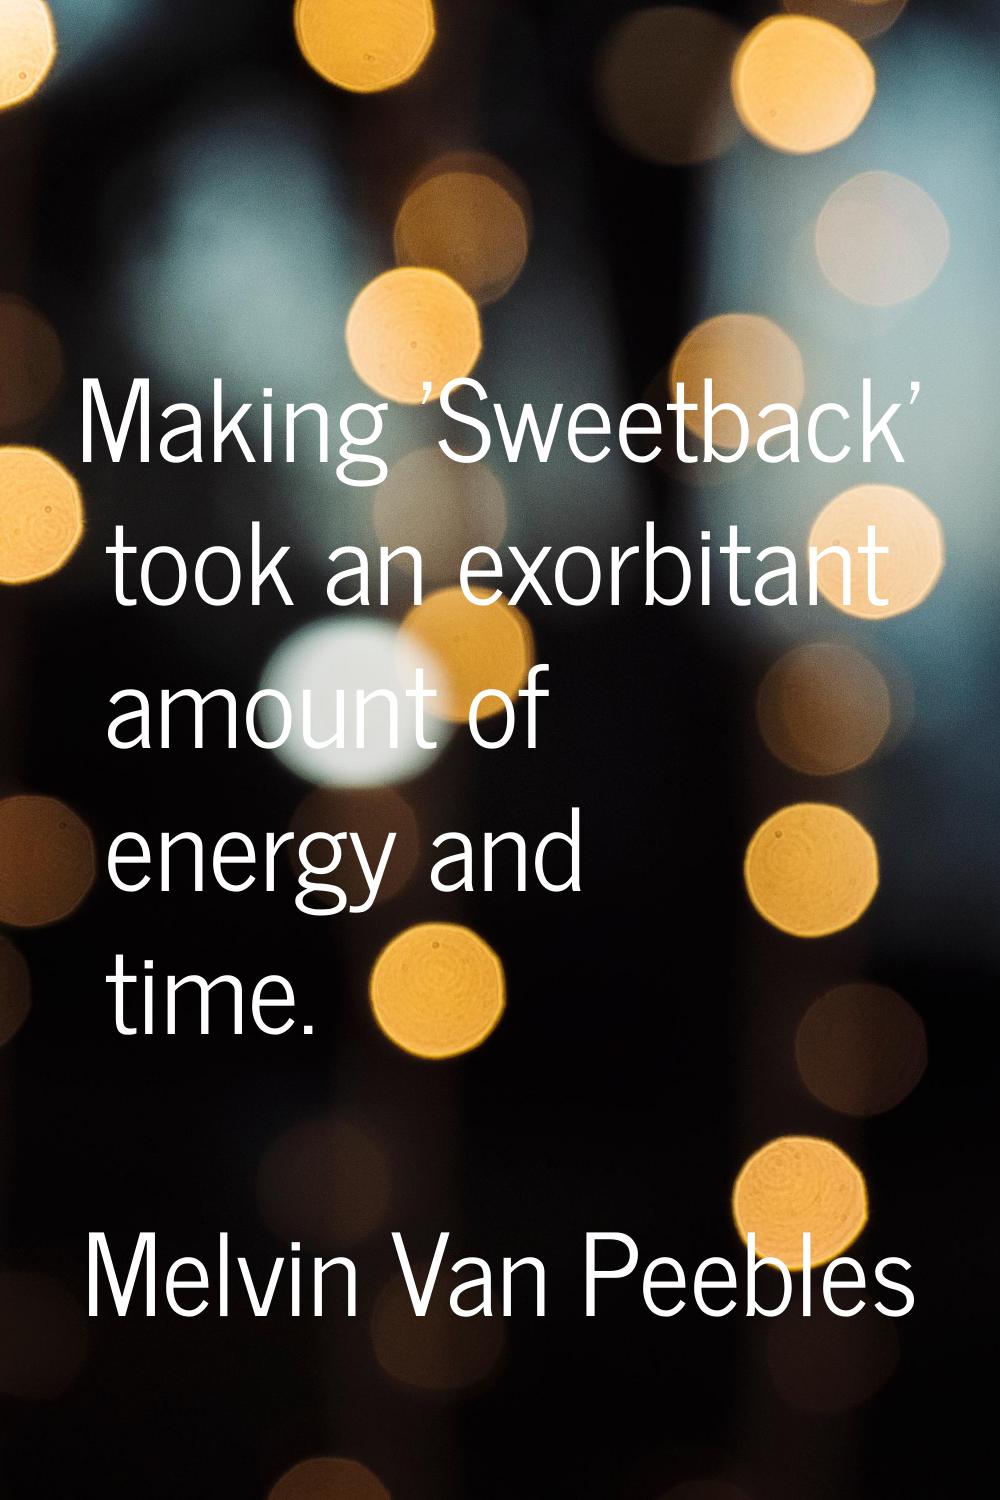 Making 'Sweetback' took an exorbitant amount of energy and time.